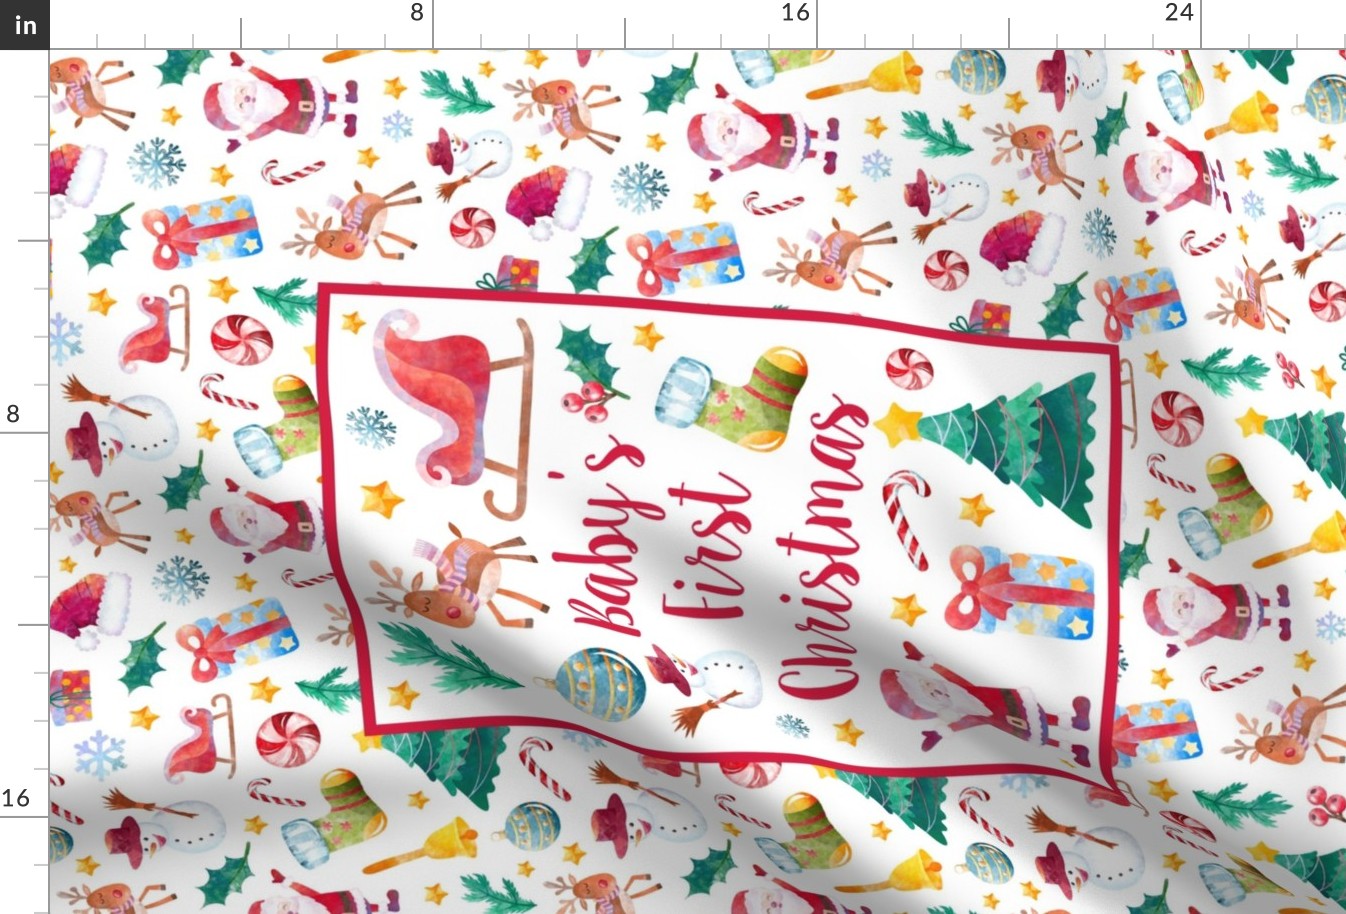 Large 27x18 Fat Quarter Panel for Tea Towel or Wall Art Hanging or Lovey Baby's First Christmas Santa Reindeer Sleigh Snowman Candy Cane Stockings and Gifts